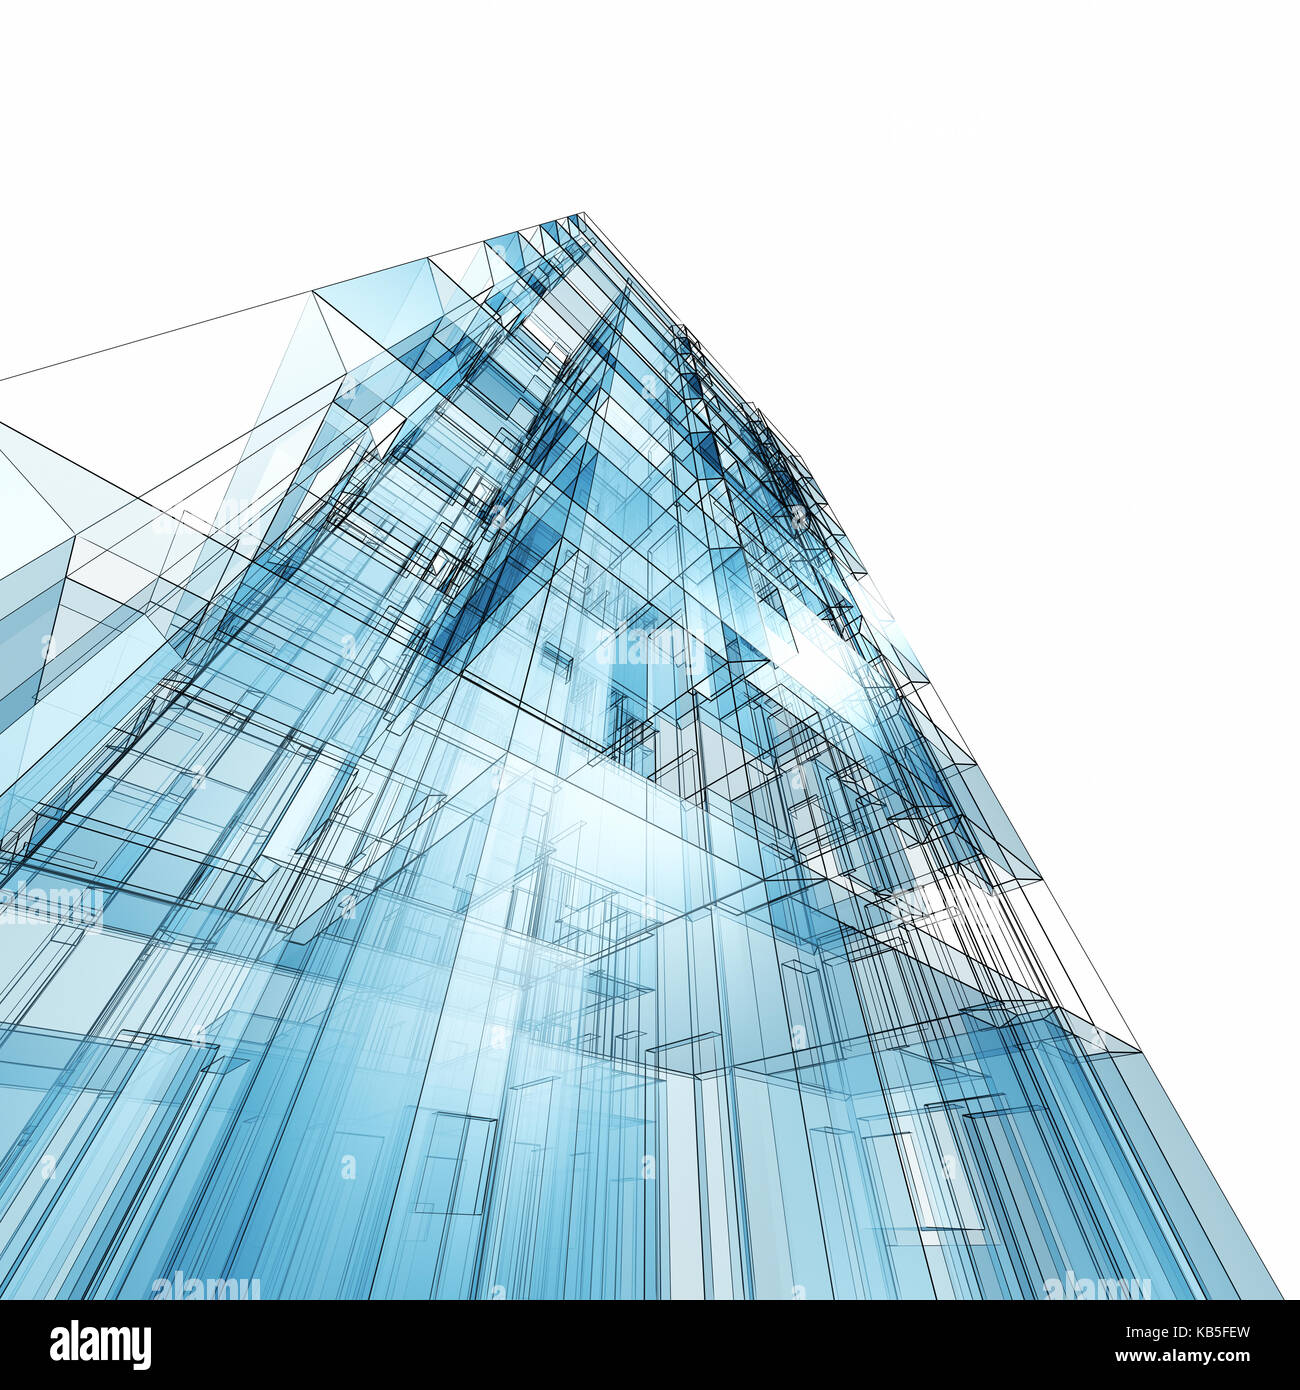 Abstract building 3d rendering Stock Photo